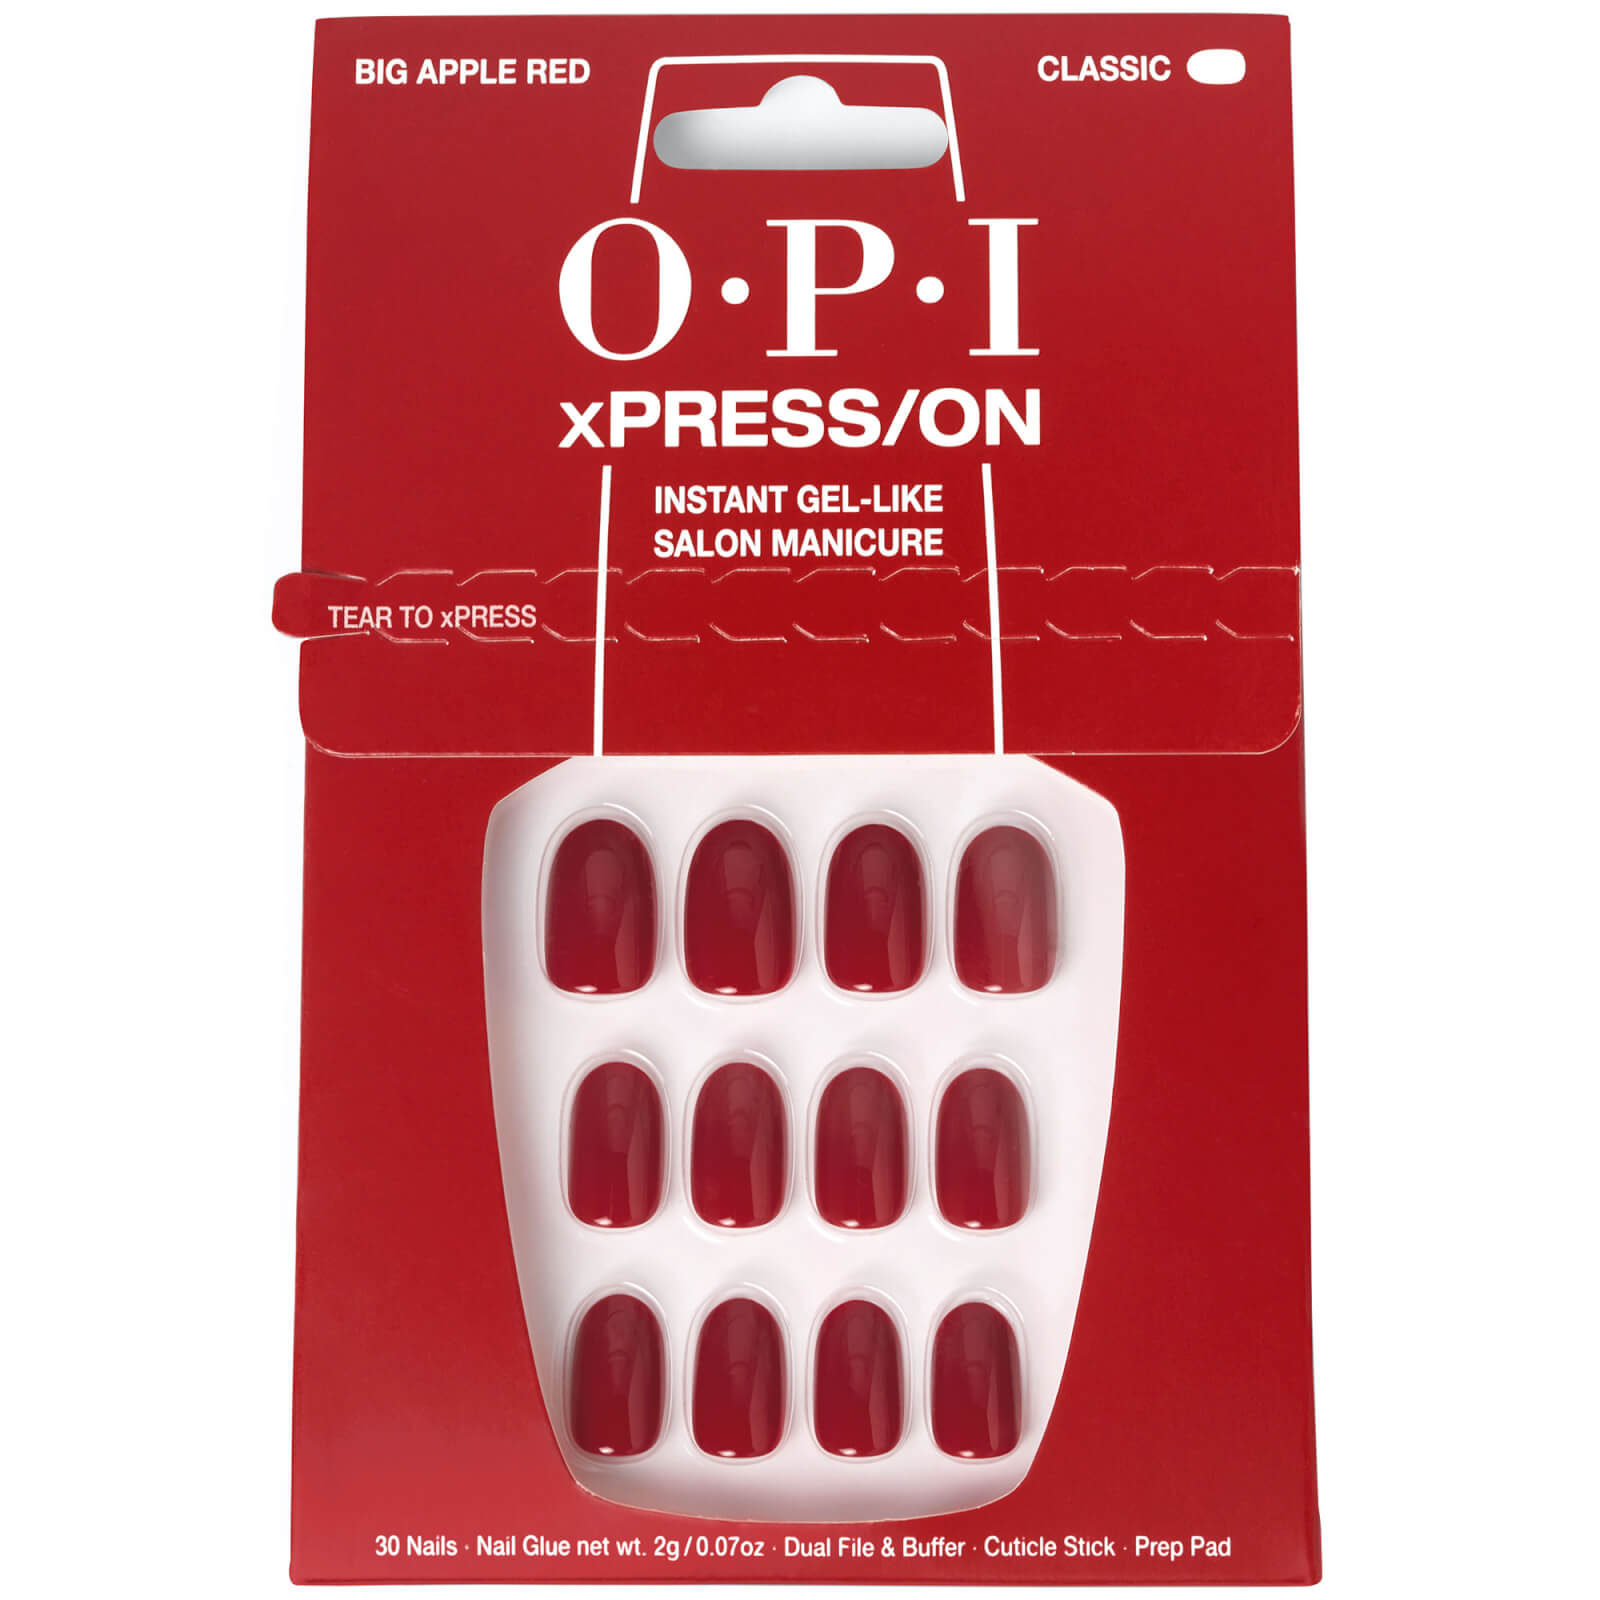 Opi Xpress/on - Big Apple Red Press On Nails Gel-like Salon Manicure In White